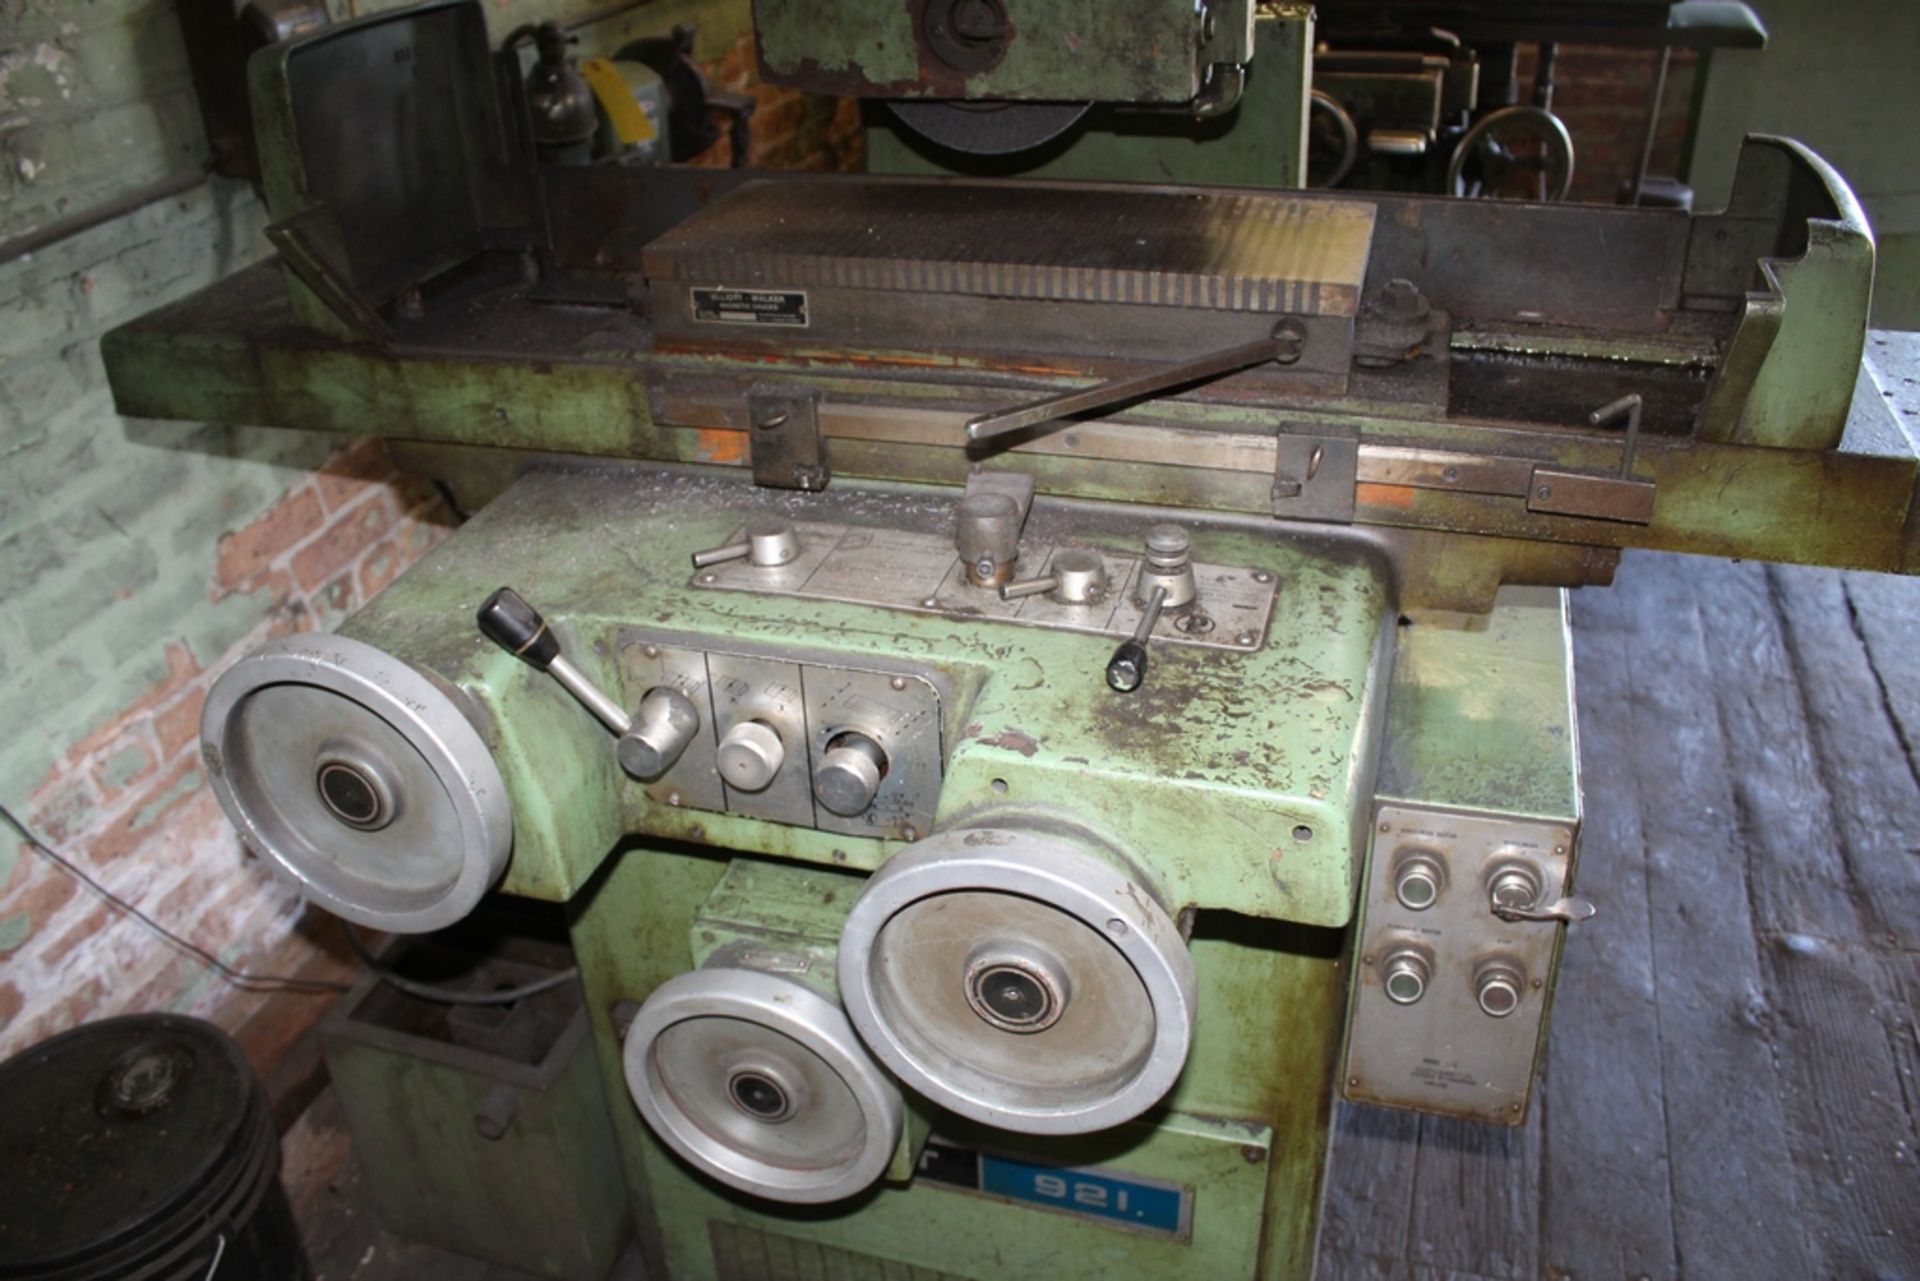 ELLIOTT 8”X20” MODEL 921 HYDRAULIC SURFACE GRINDER, S/N 109907-1530, WITH PERMANENT MAGNETIC CHUCK - Image 3 of 5